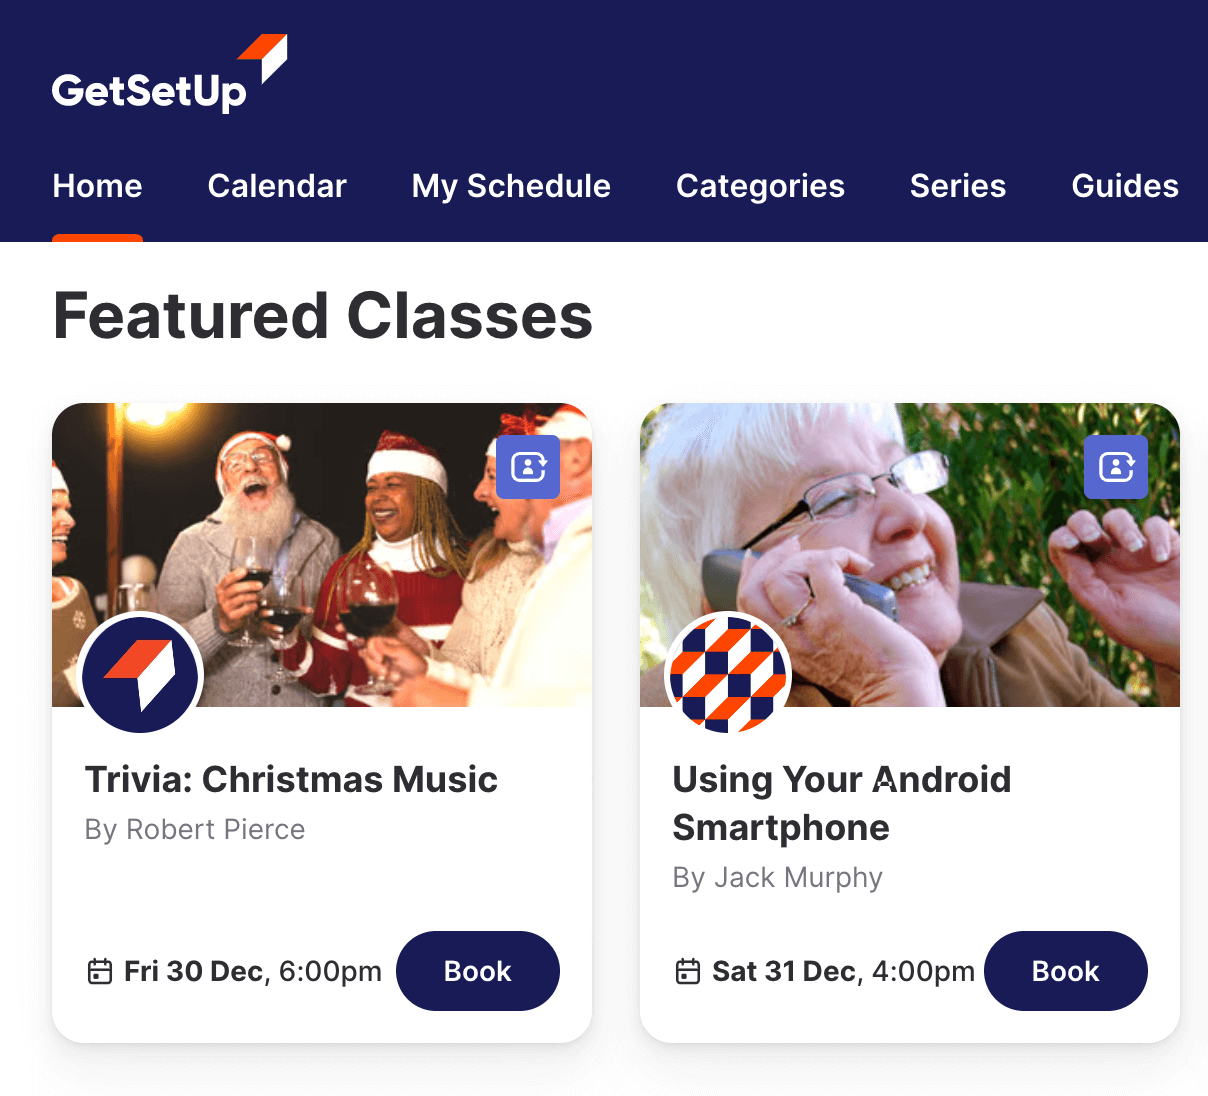 GetSetUp’s customized platform offers an interface for older adults to learn, create, and share their wisdom safely.